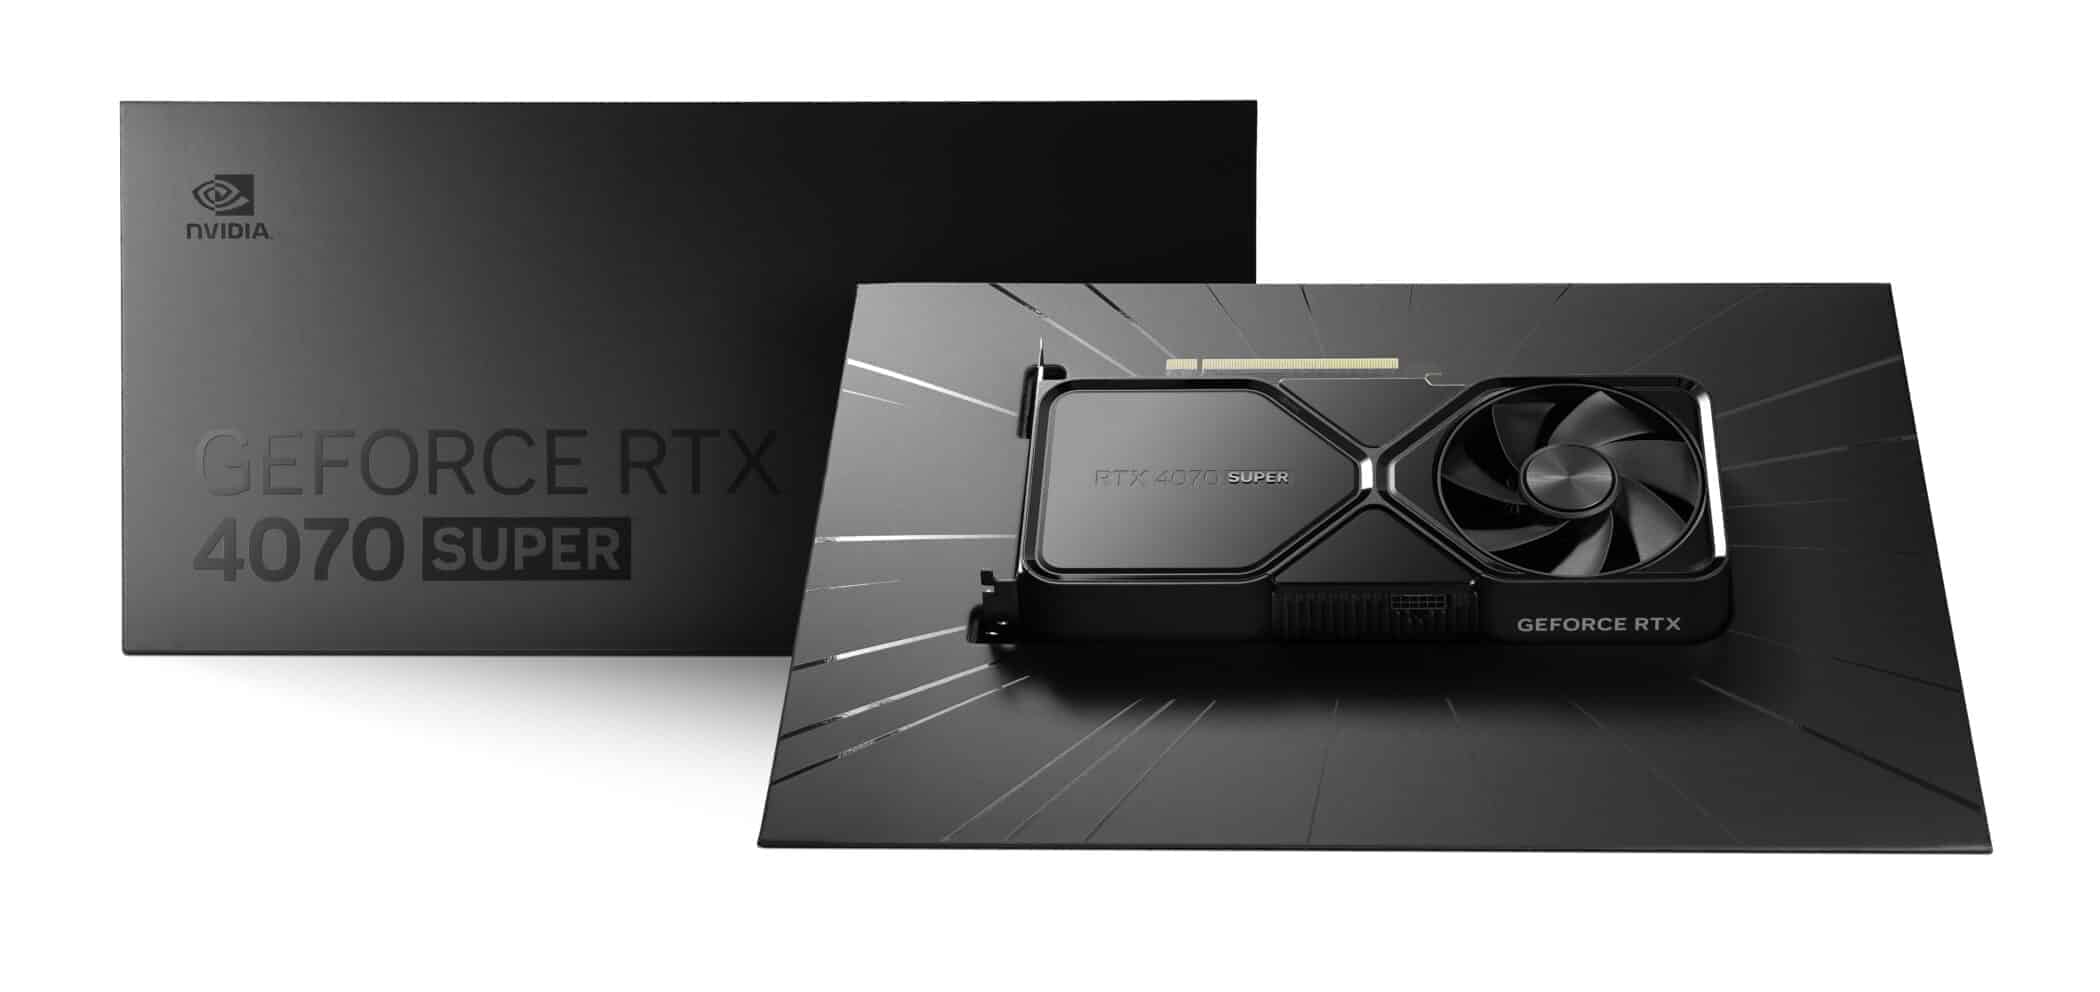 geforce rtx 4070 super with packaging image